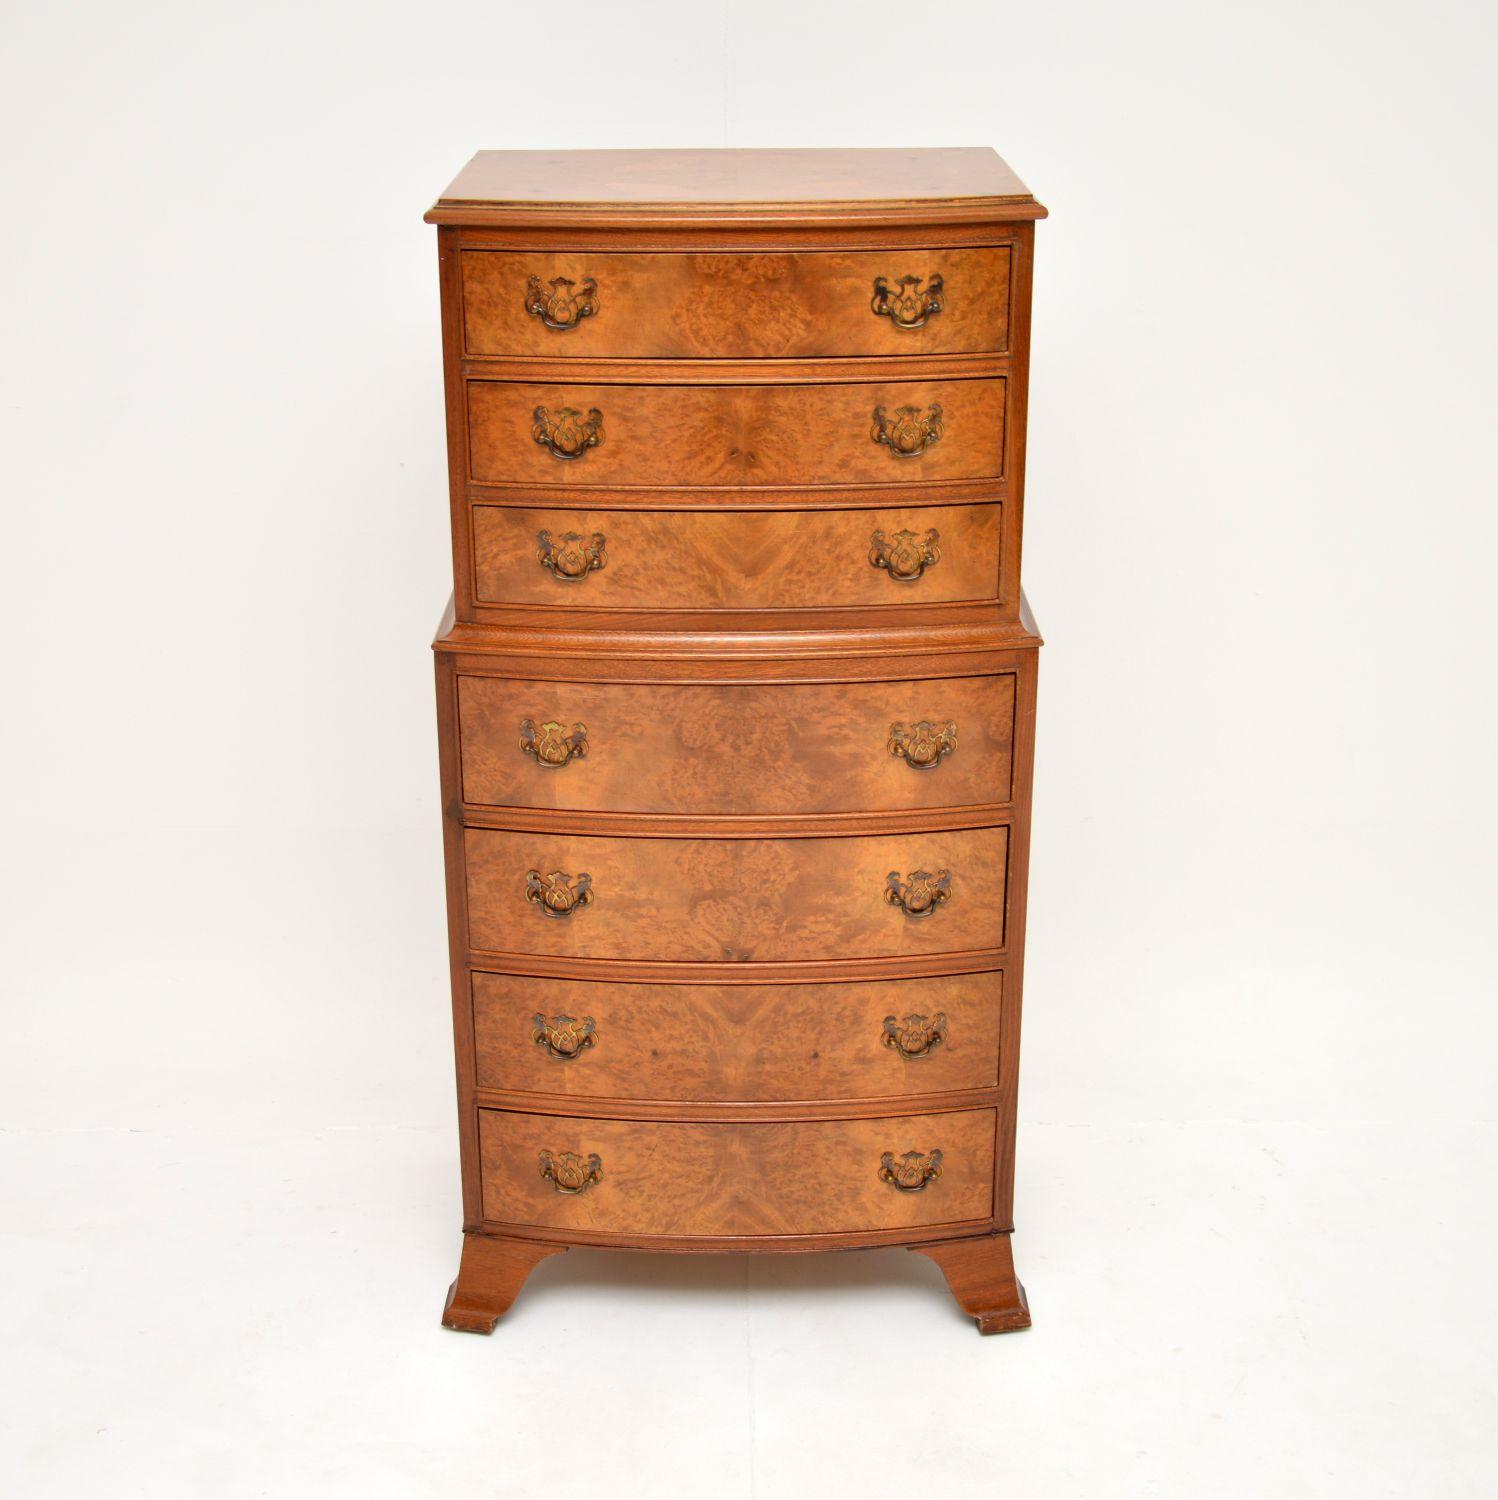 A gorgeous antique figured walnut chest on chest of drawers of small proportions in the Georgian style. This was made in England, it dates from around the 1930’s.

It is of great quality and is a very useful size; slim so as not to take up too much